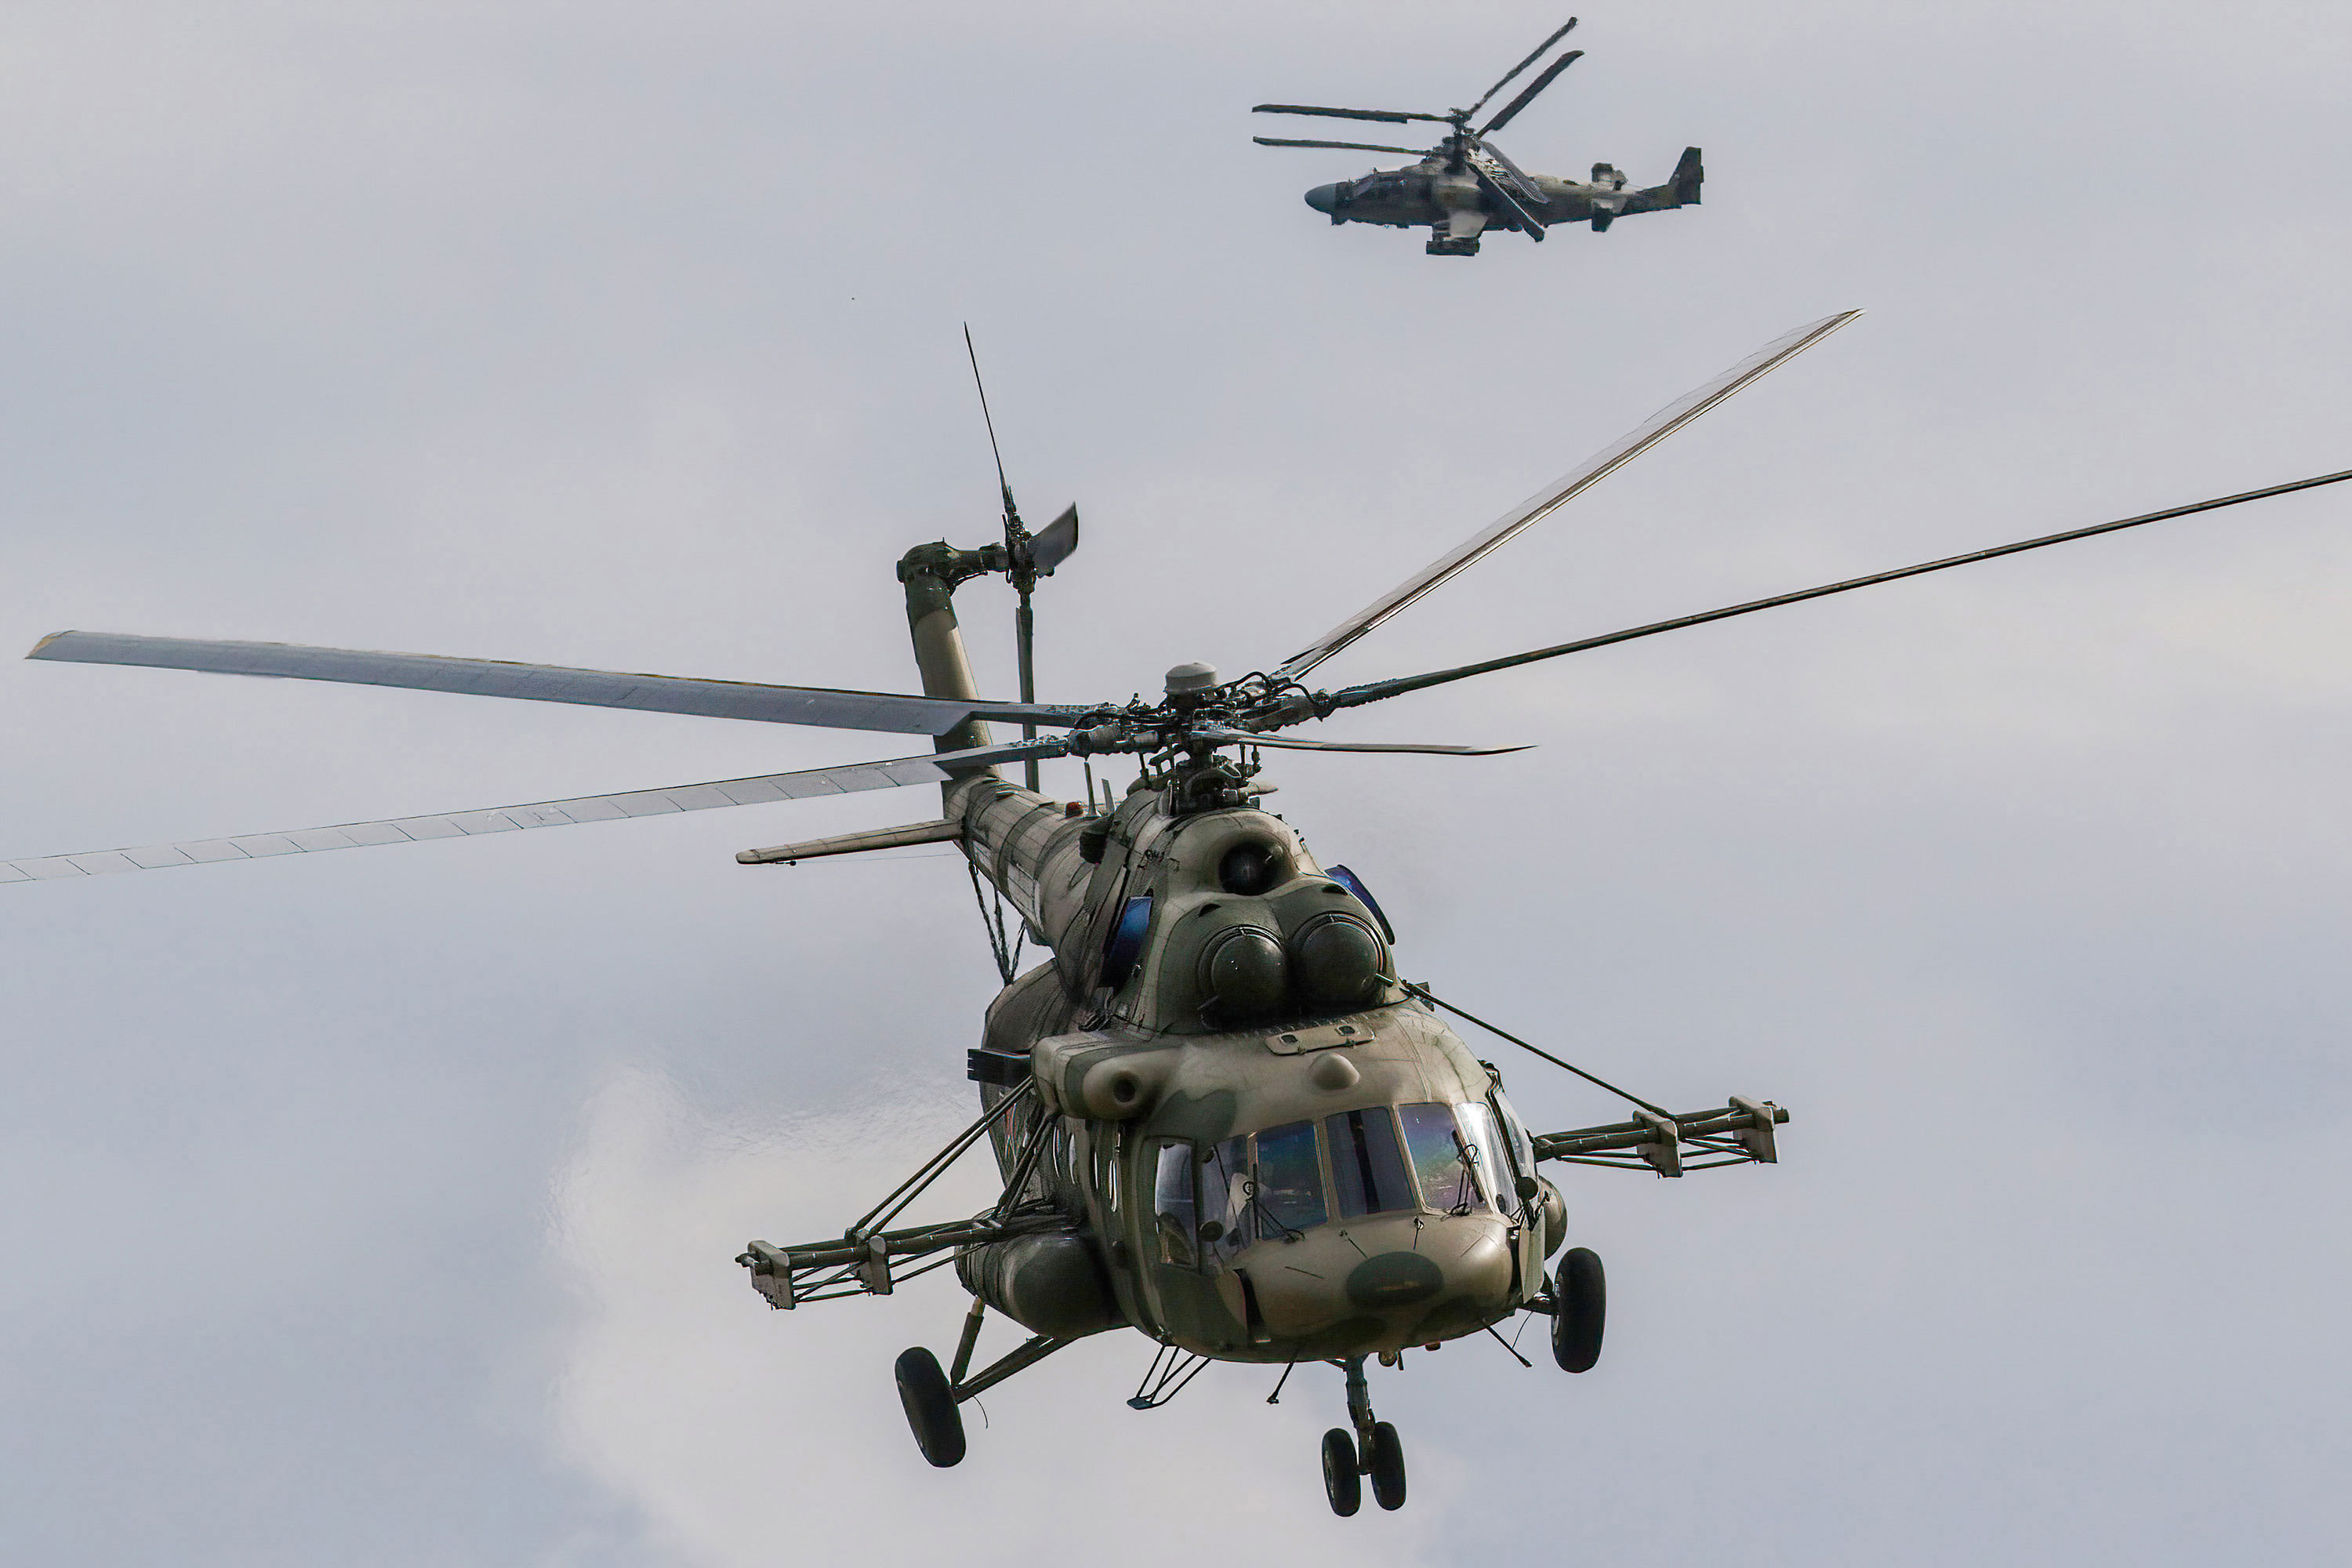 Russian Air Force Mil Mi-8 attack helicopter